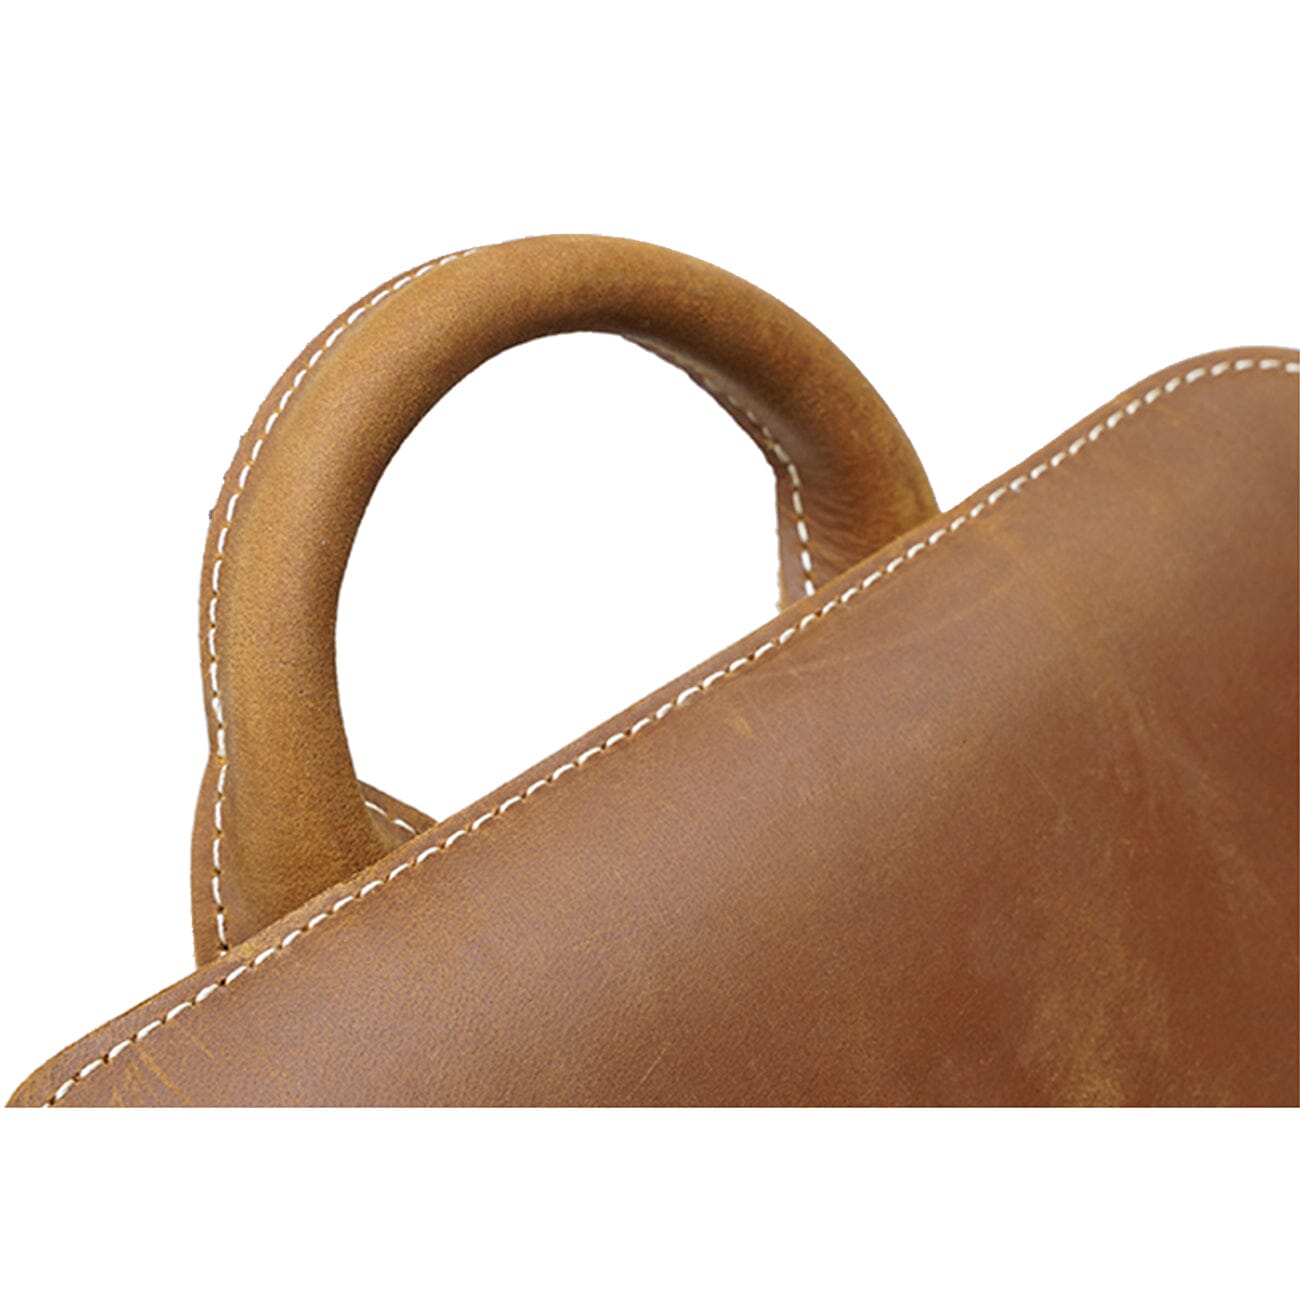 top leather handle of a leather work backpack